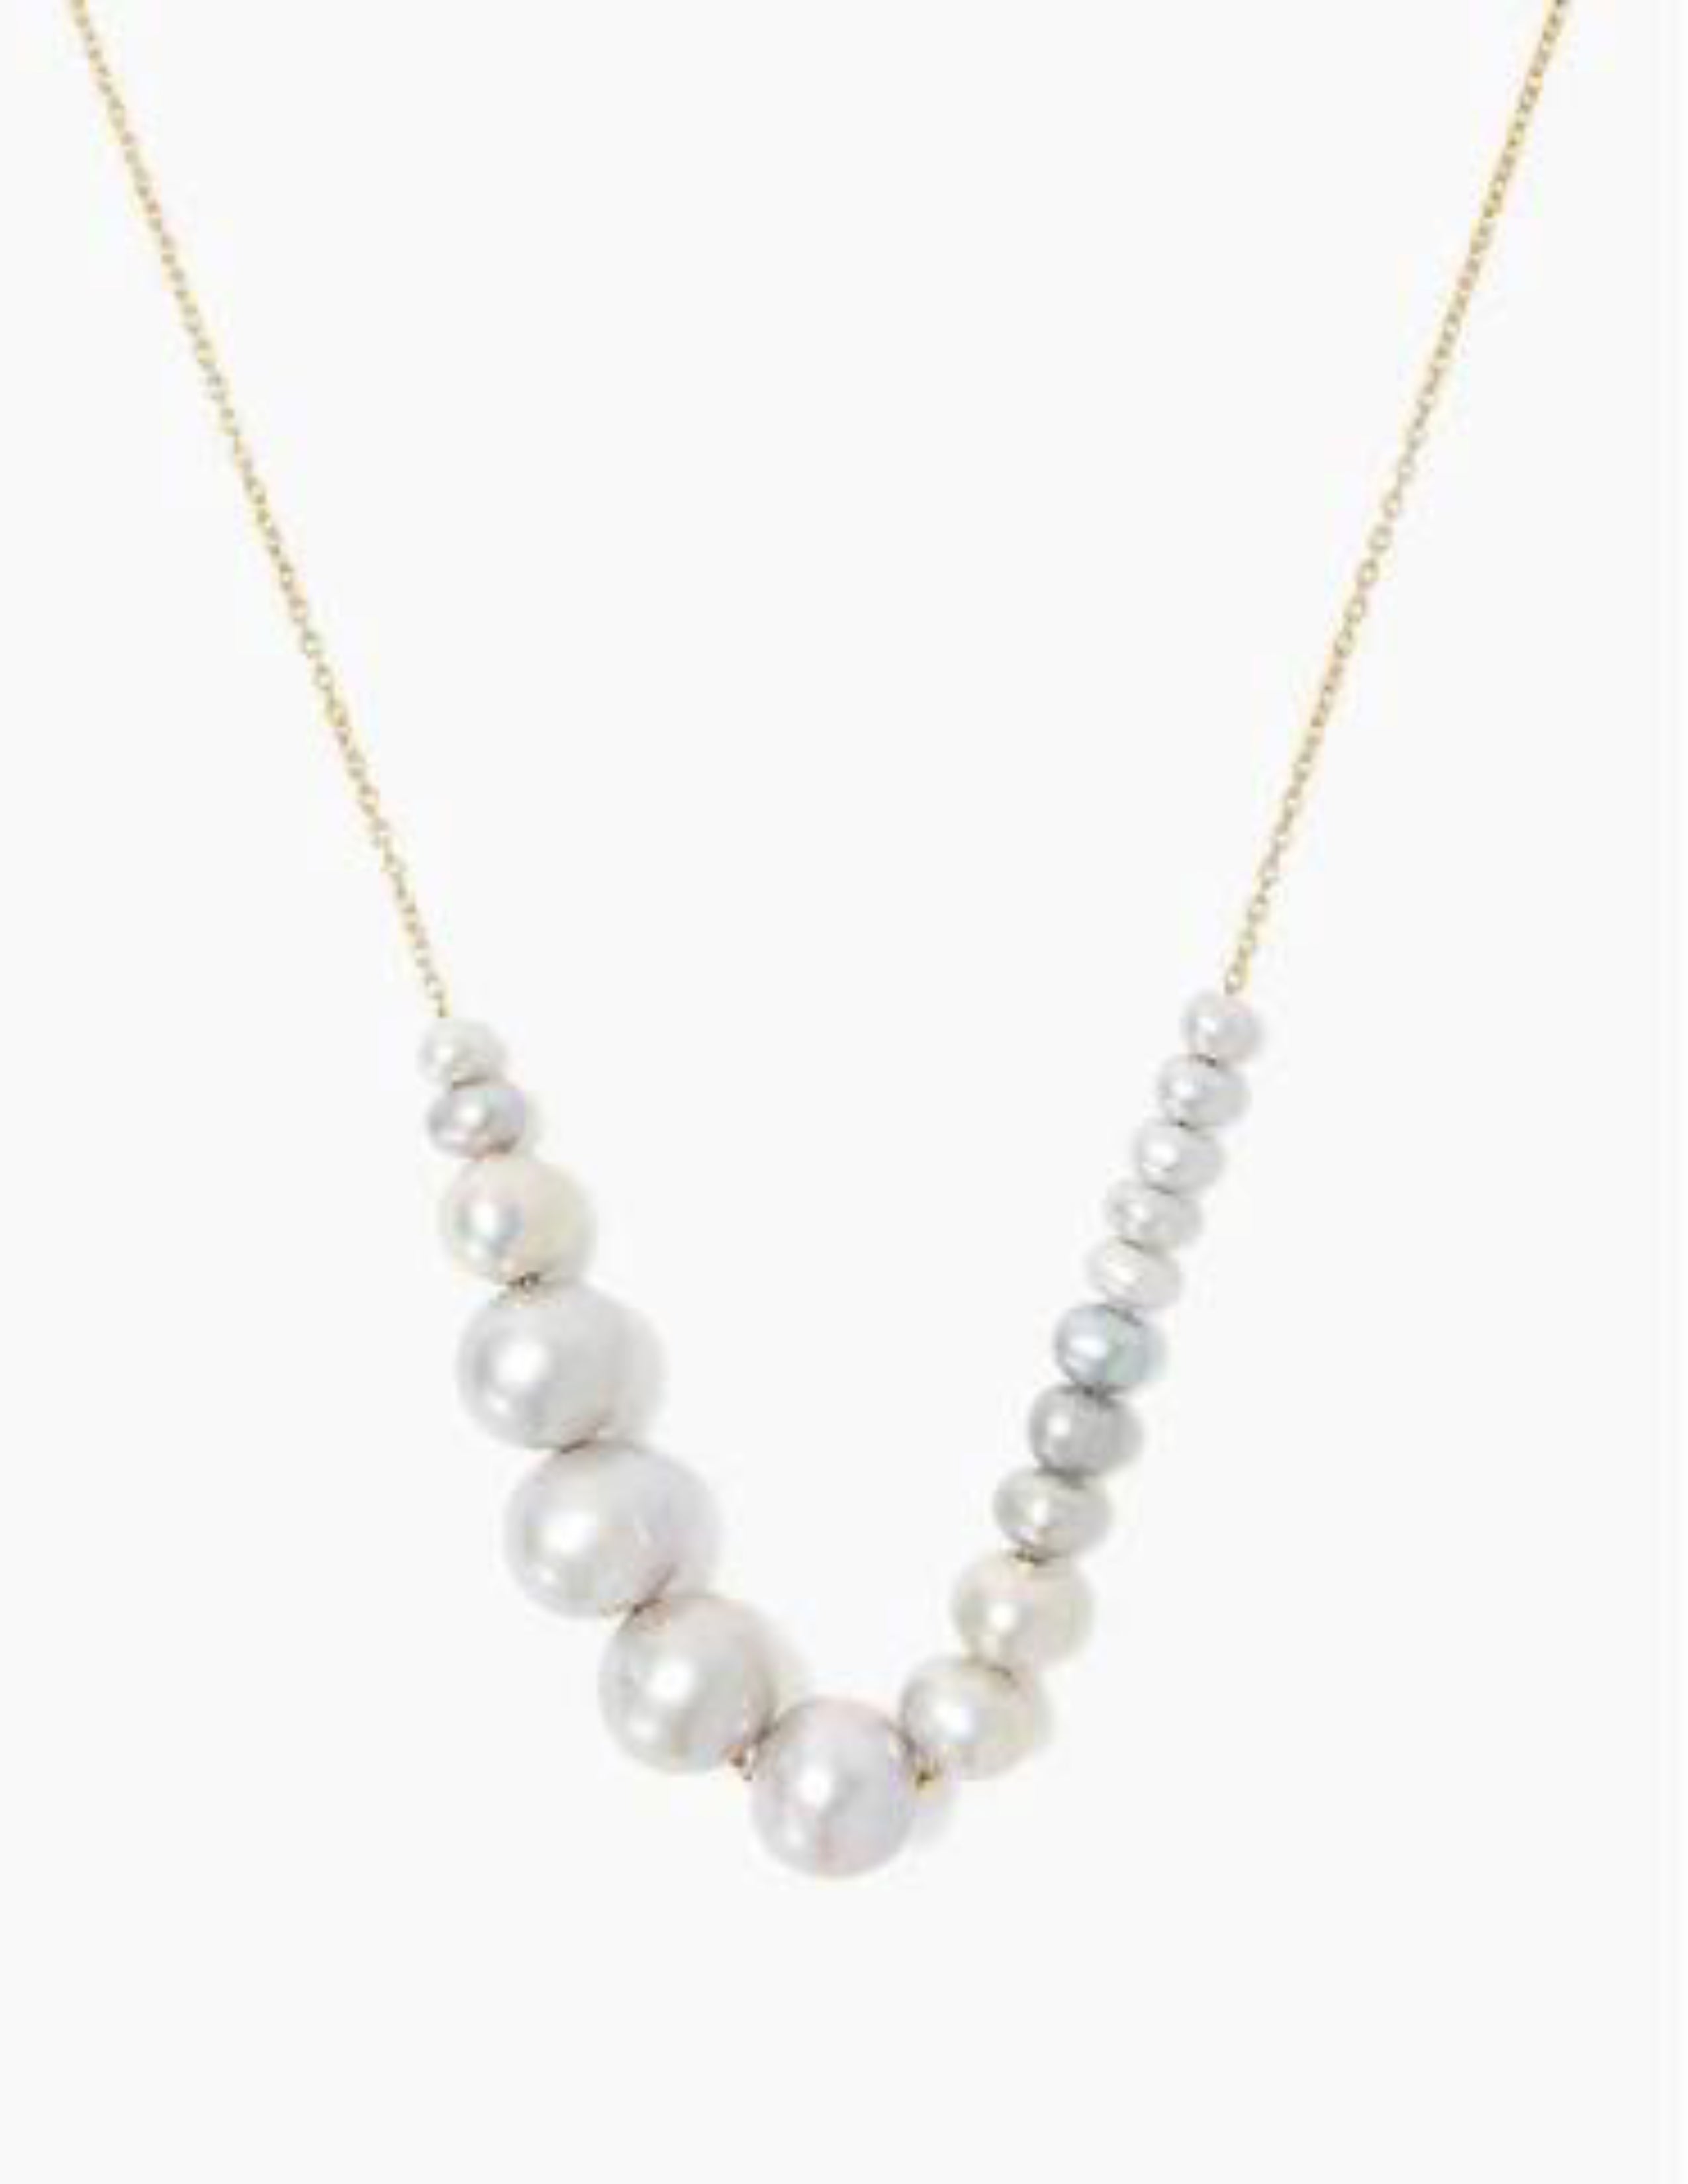 Graduated Grey Pearl Gold Necklace